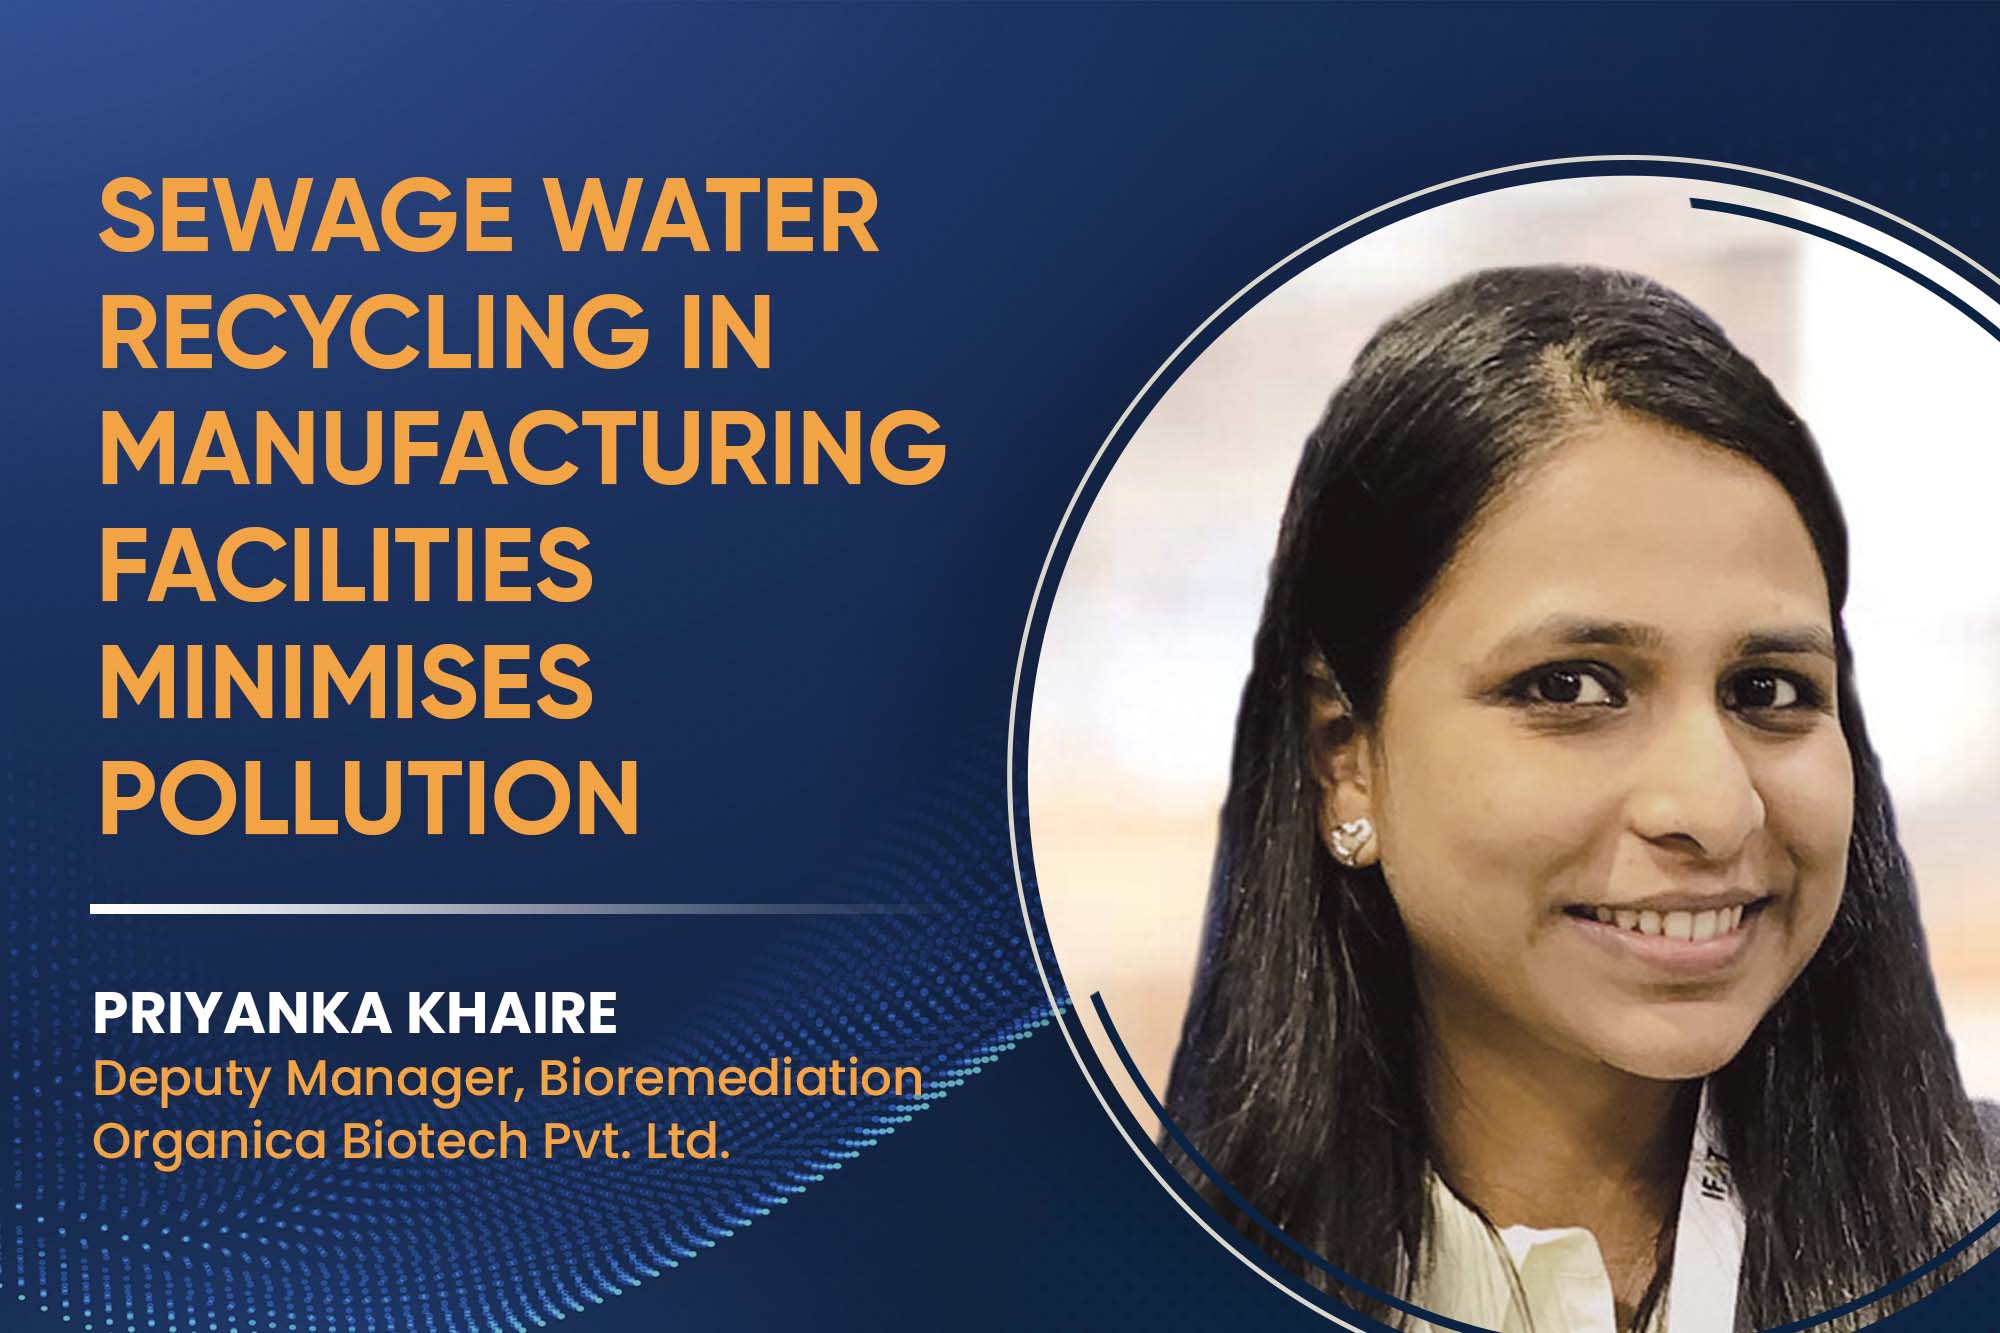 Sewage water recycling in manufacturing facilities minimises pollution